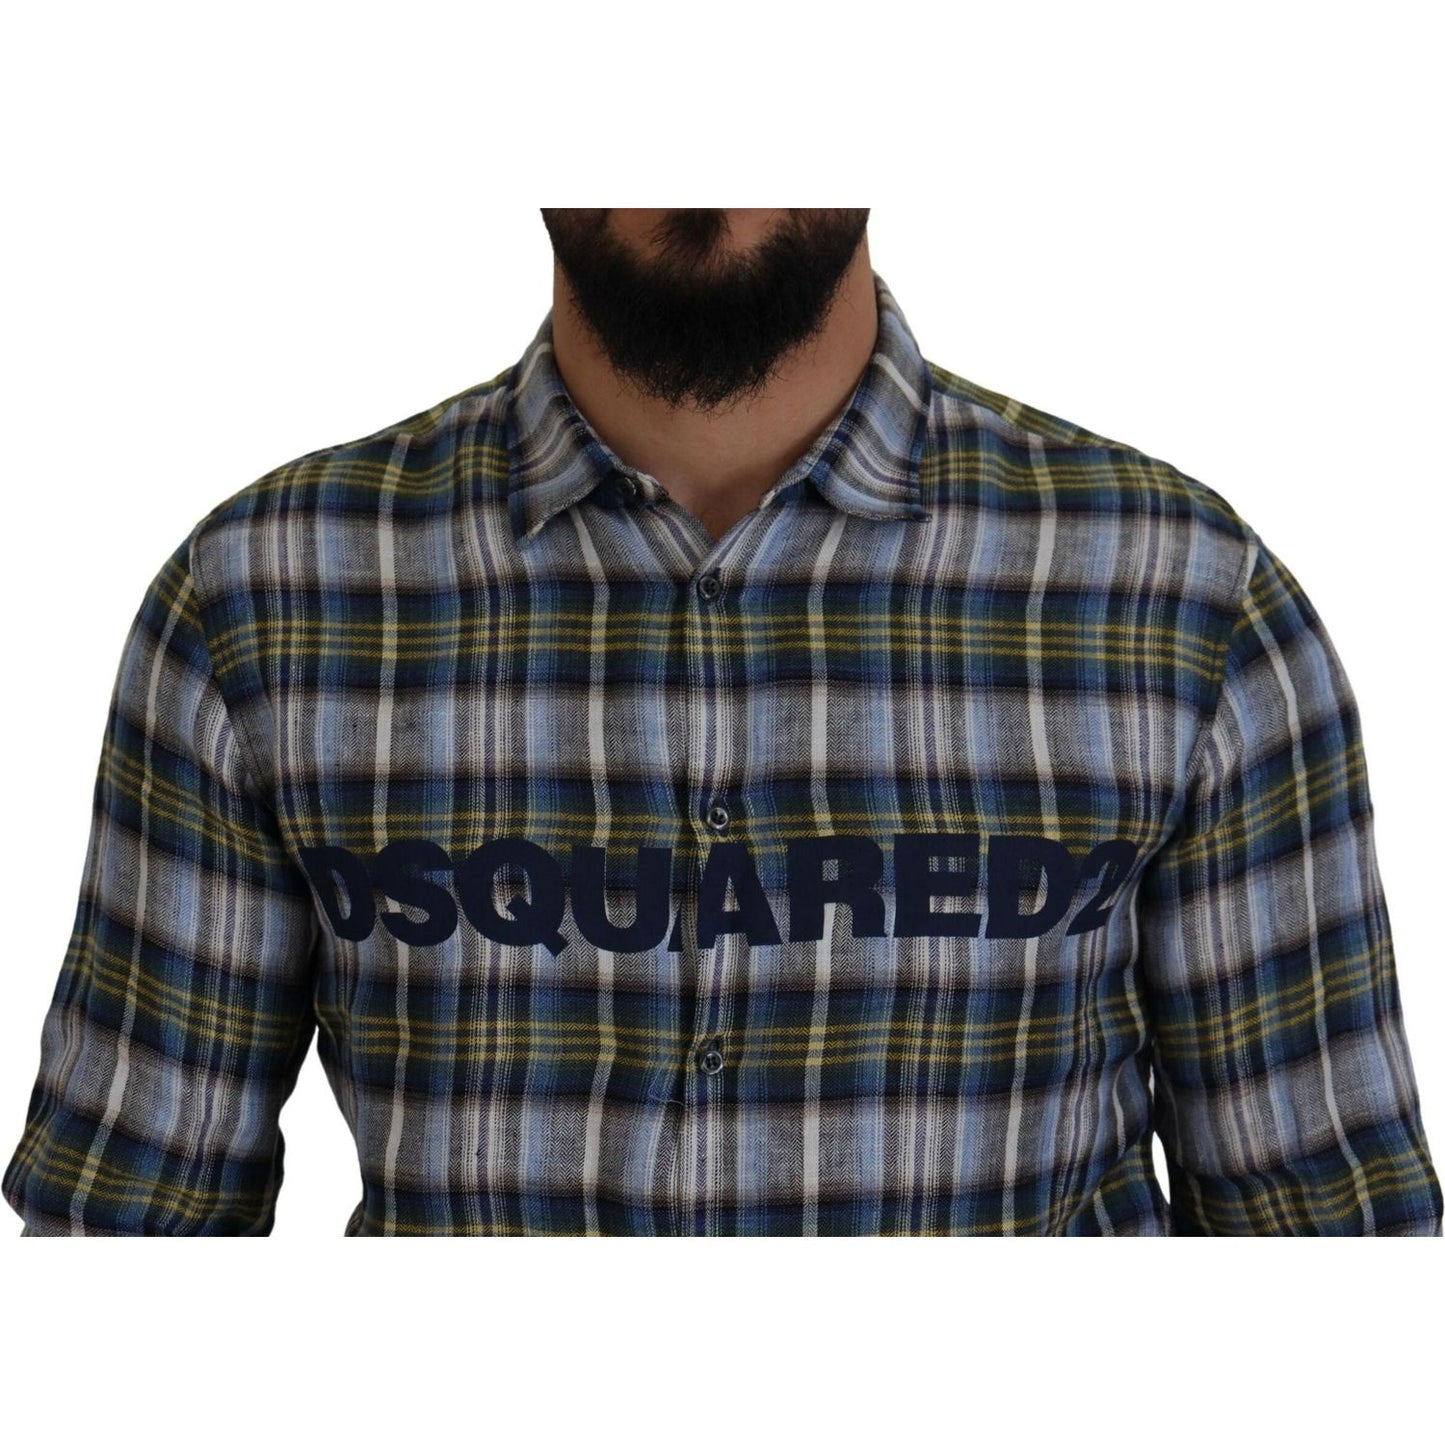 Dsquared² Multicolor Checkered Casual Men Long Sleeves Shirt multicolor-checkered-casual-men-long-sleeves-shirt